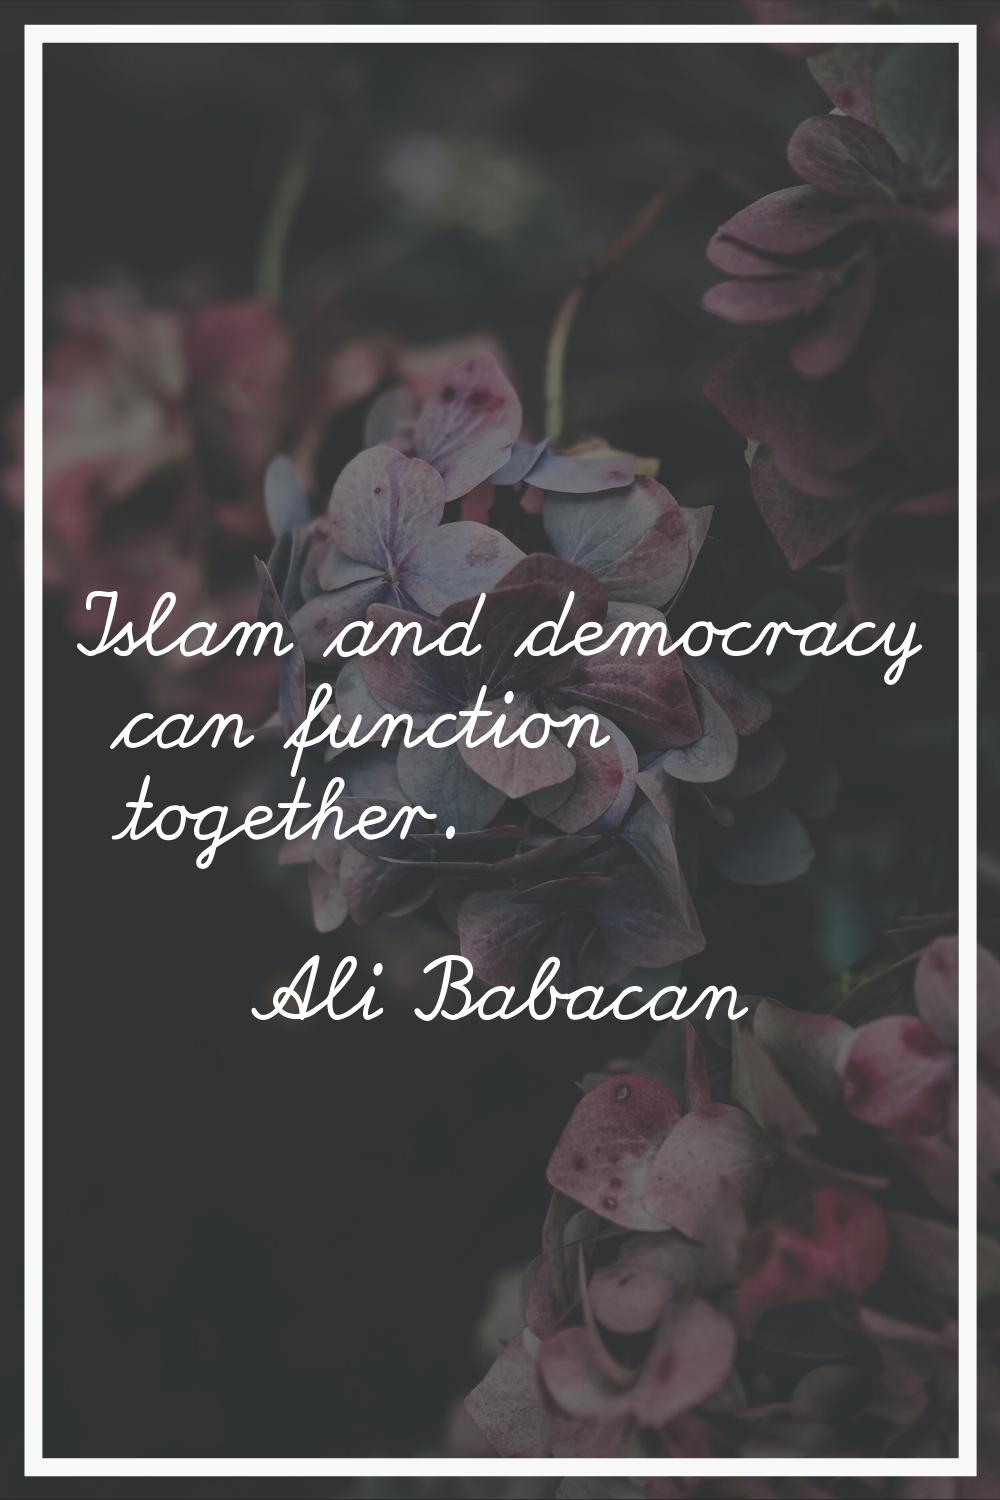 Islam and democracy can function together.